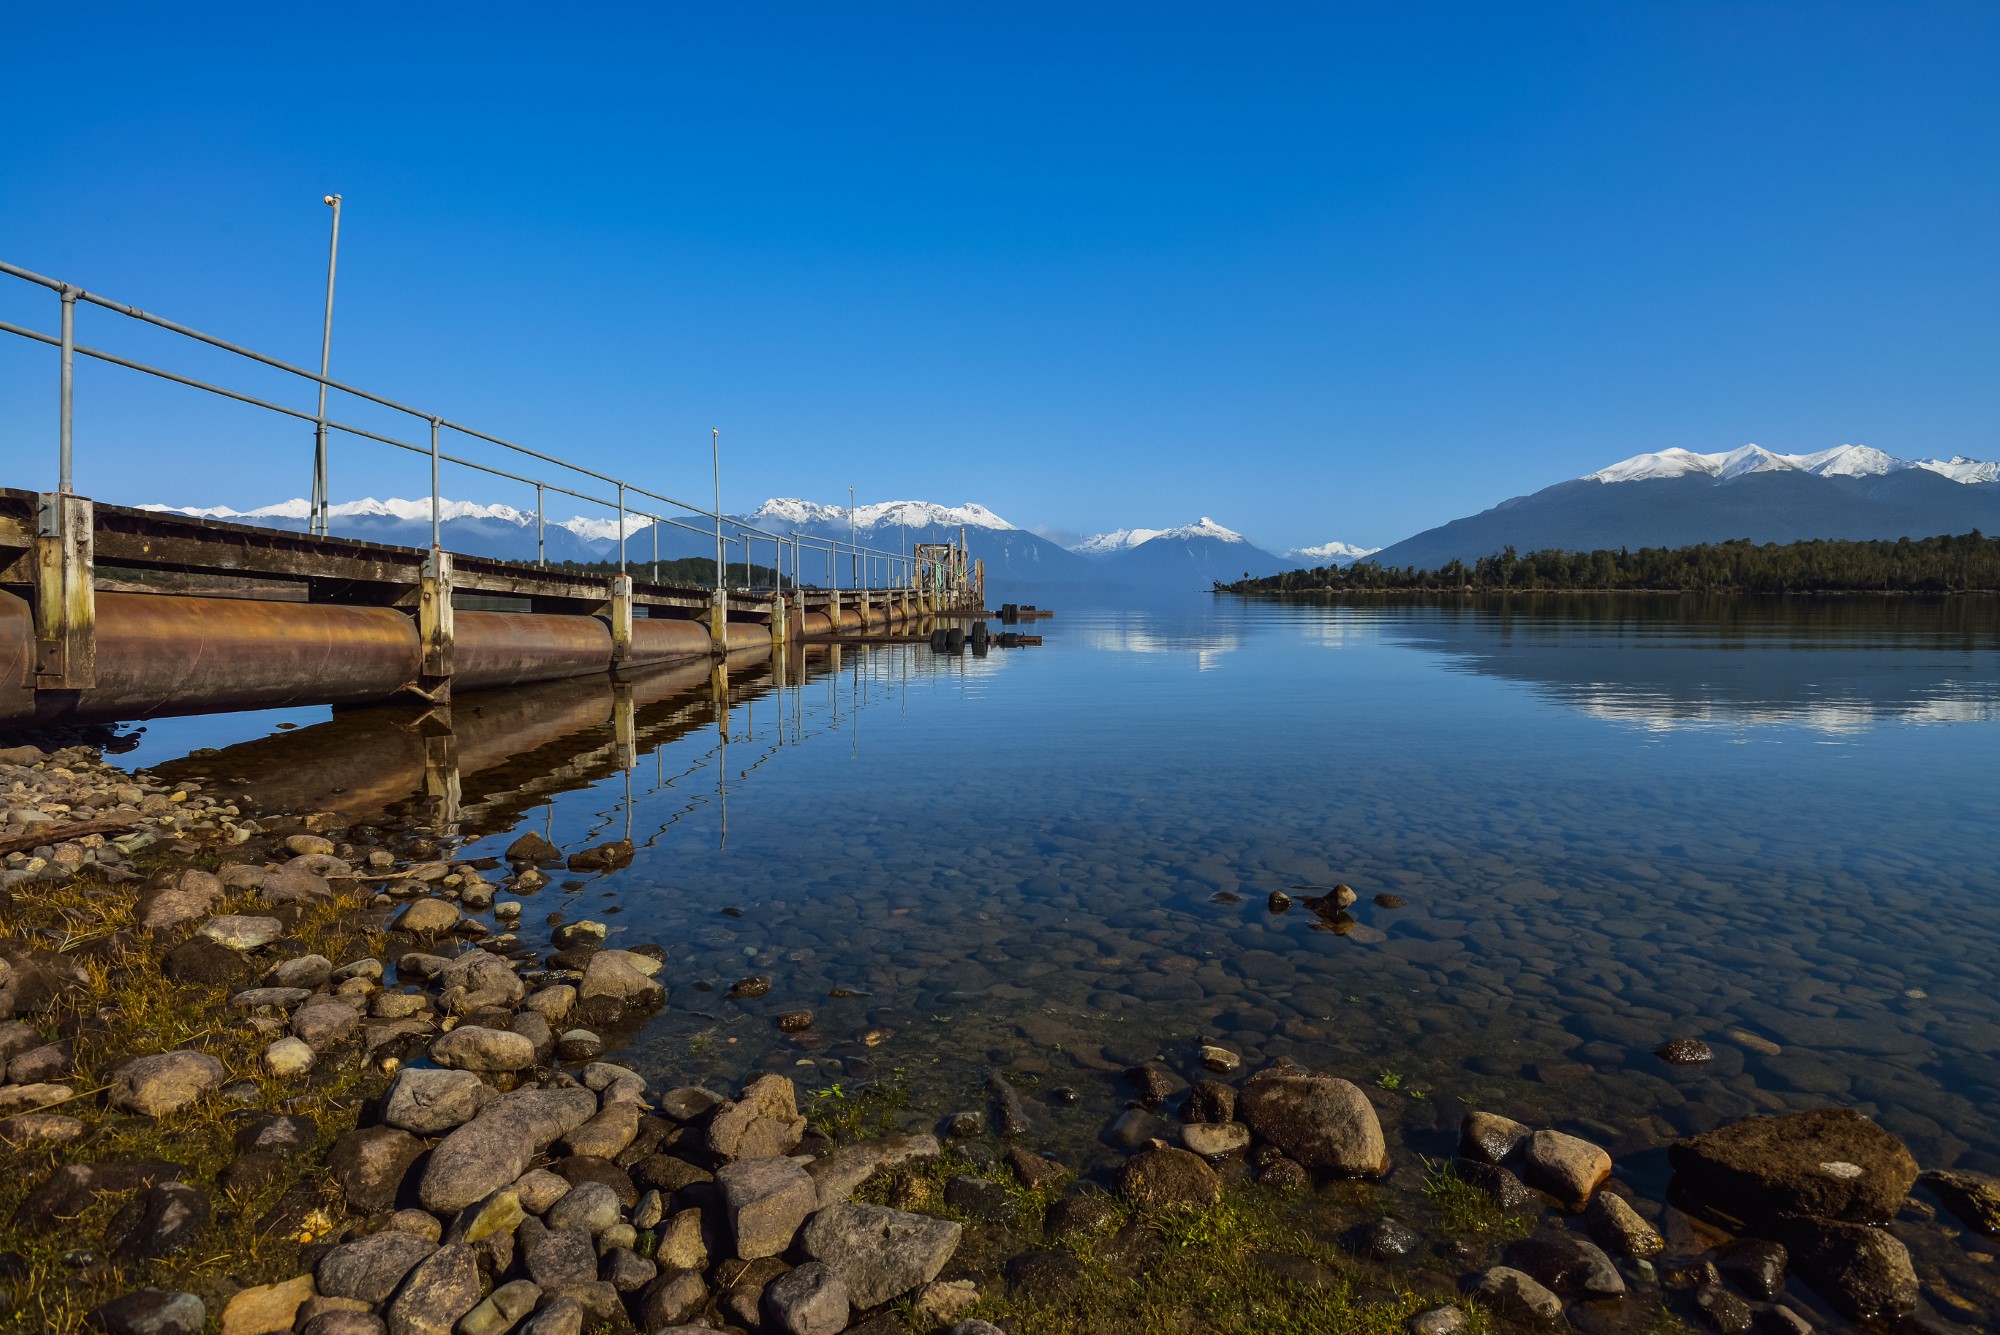 Jetty extending into a lake with mountains in background, Te Anau, New Zealand